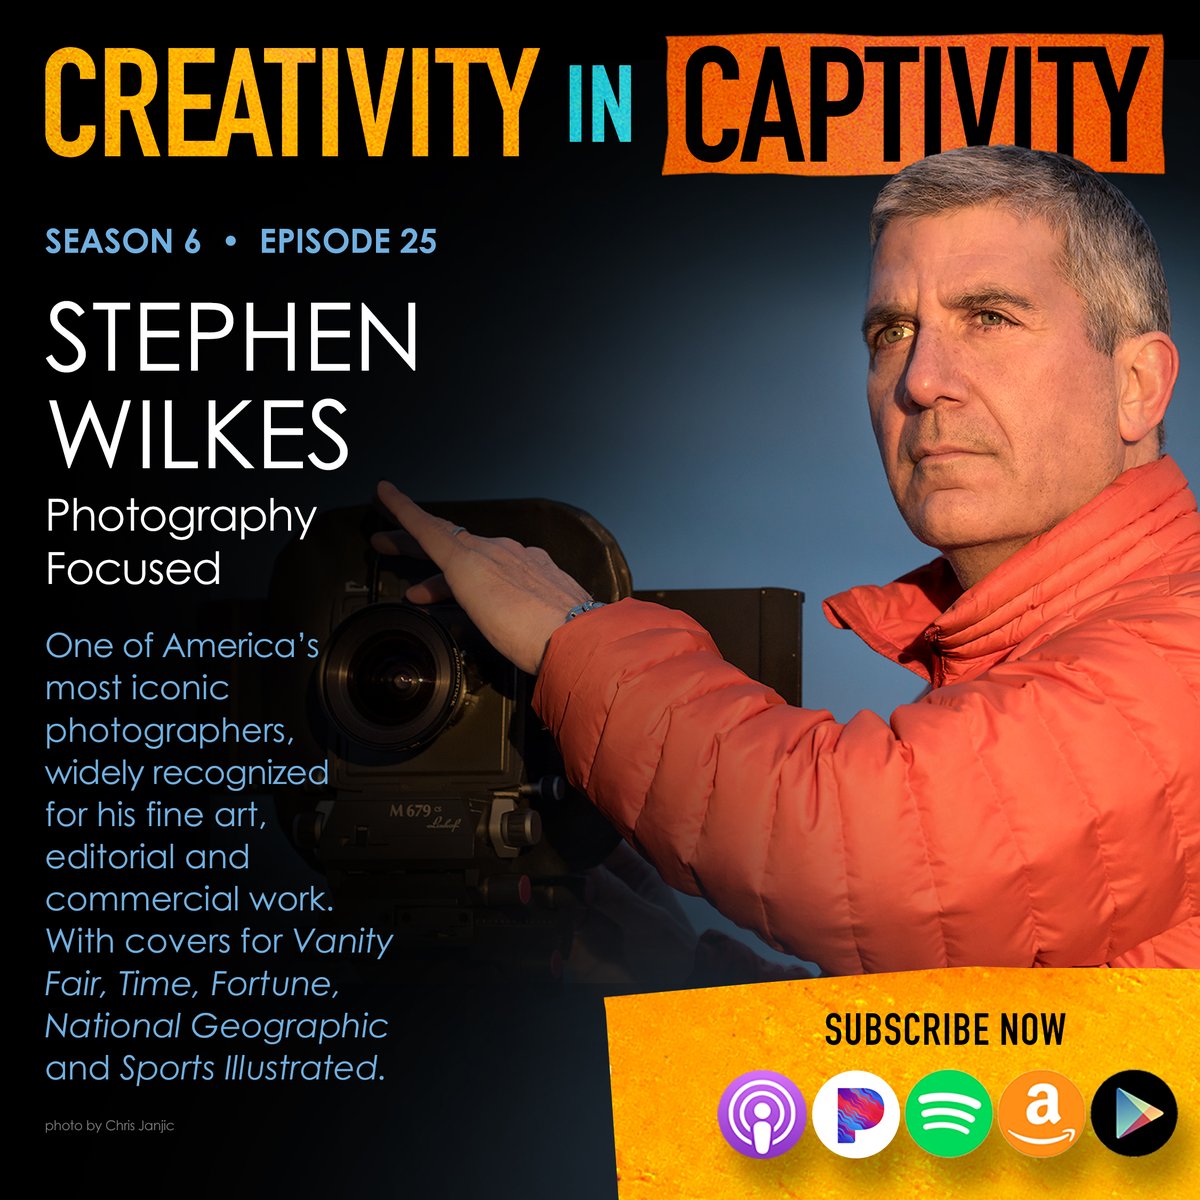 Check out an all new @creativityincap with @swilkesphoto, one of America's most iconic photographers, widely recognized for his fine art, editorial and commercial work ☀️ tune in with @pathazell link.chtbl.com/CIC_StephenWil…